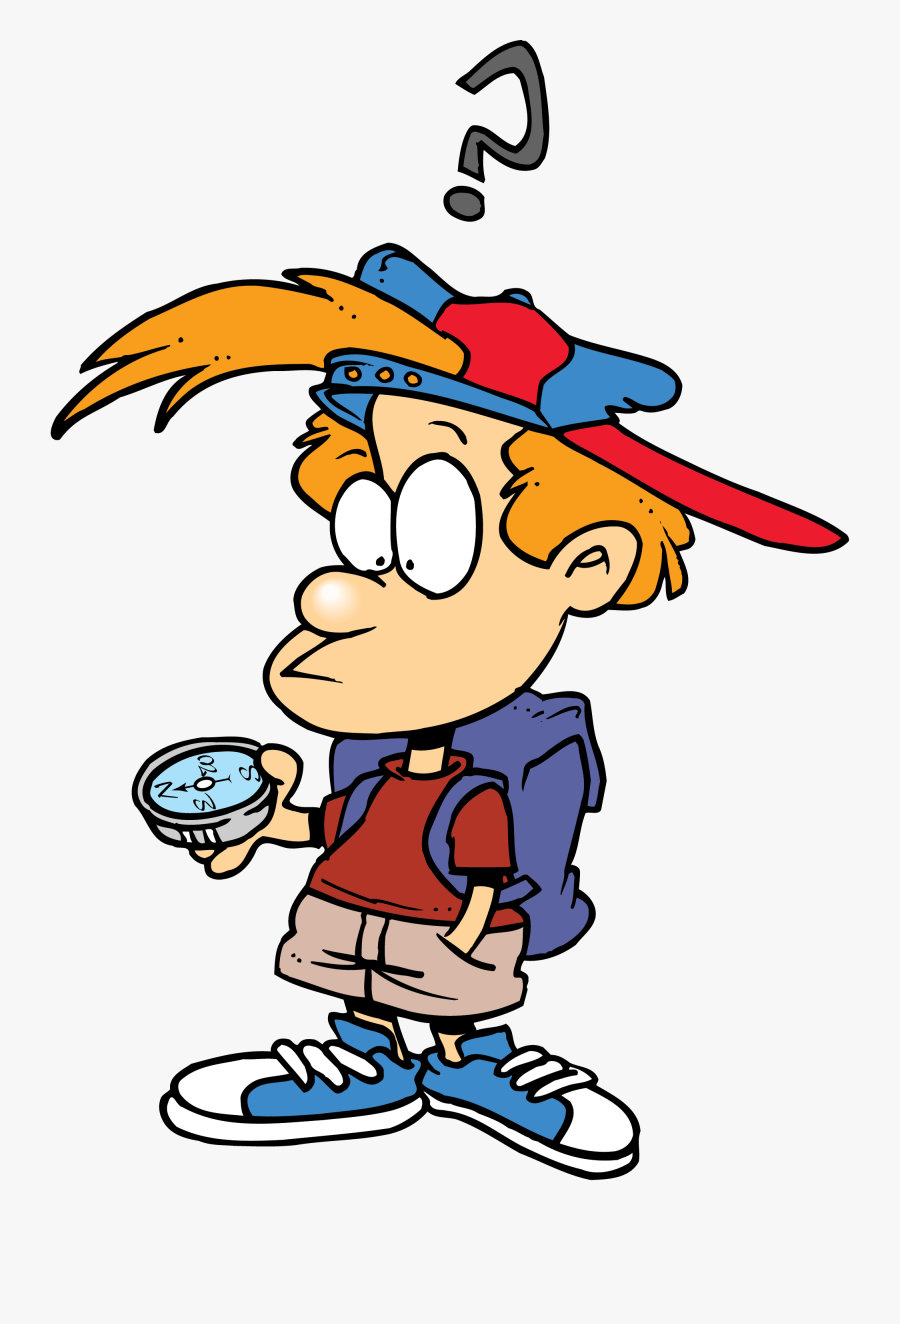 Read A Compass Clipart - Kid With Compass Clipart, Transparent Clipart